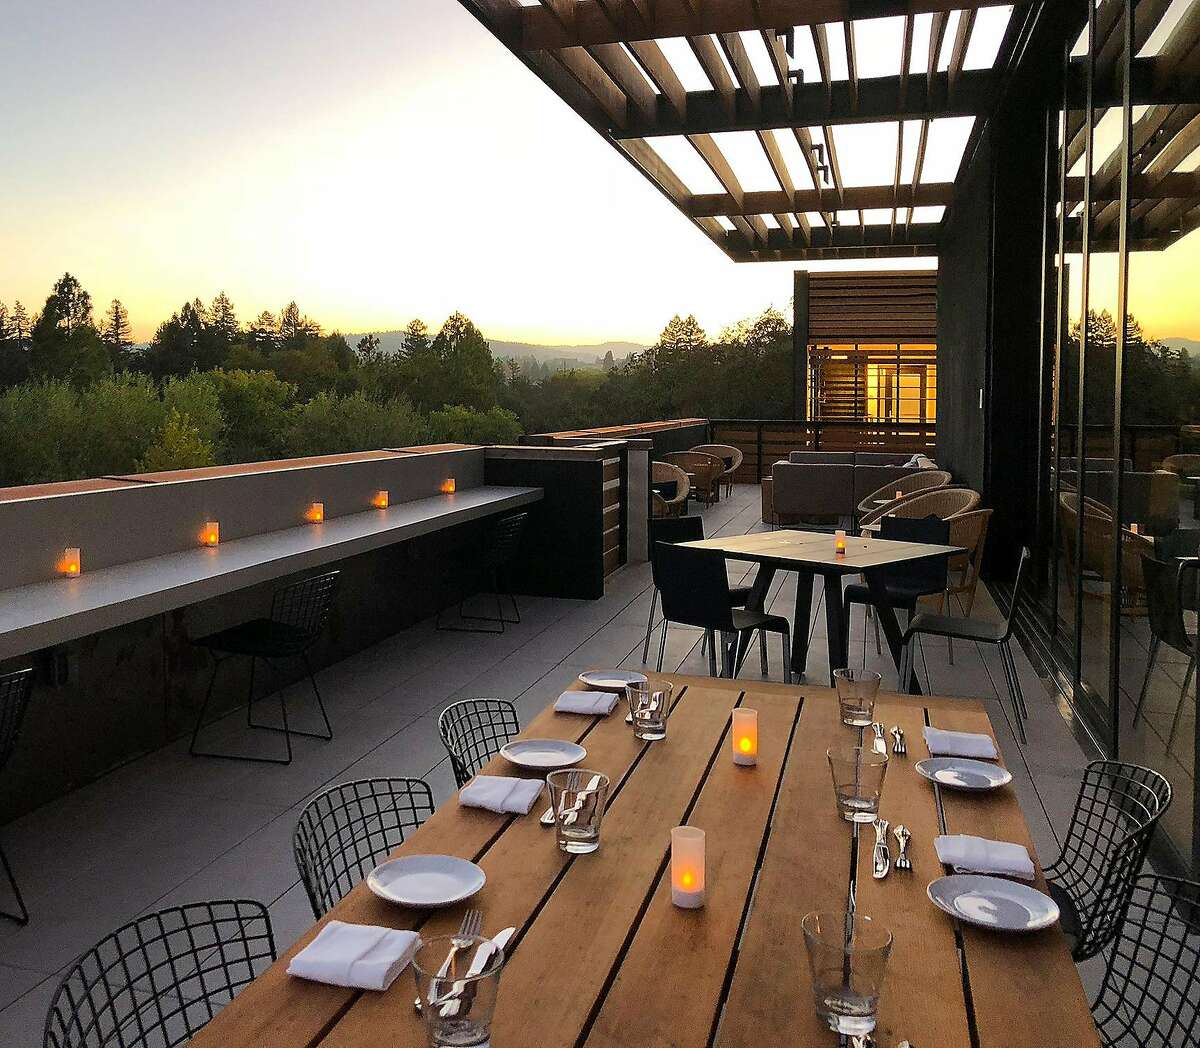 The rooftop terrace at the Harmon Guest House features views of Fitch Mountain, the Sonoma hills and downtown Healdsburg.